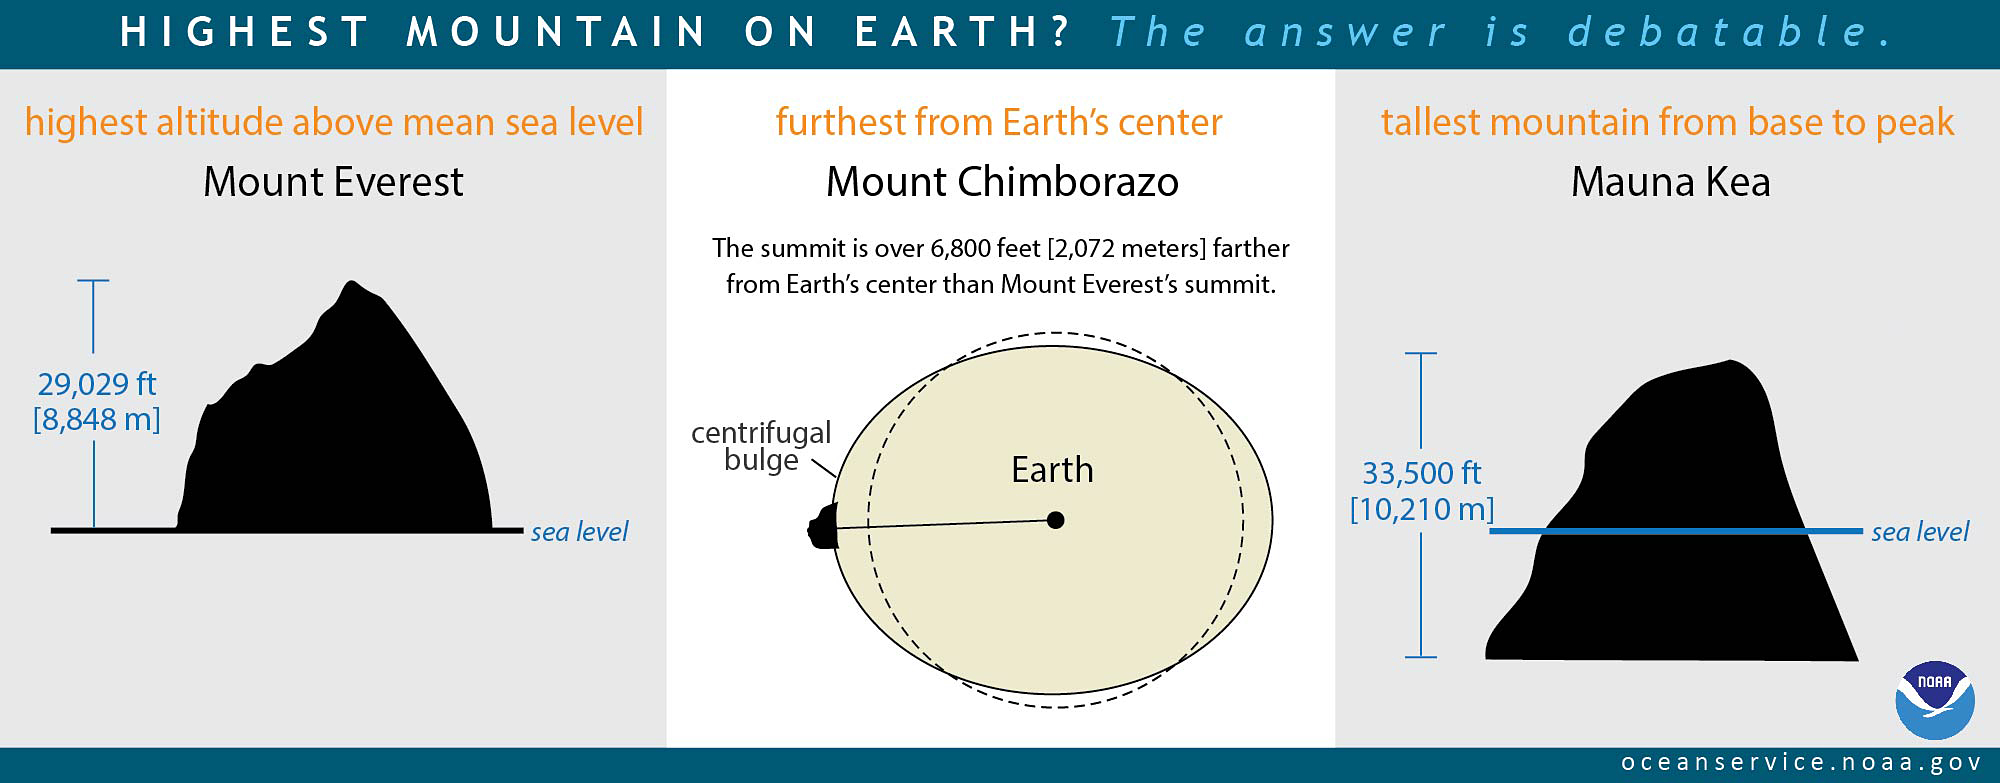 The highest point above Earth’s center is the peak of Ecuador’s Mount Chimborazo, located just one degree south of the Equator where Earth’s bulge is greatest.